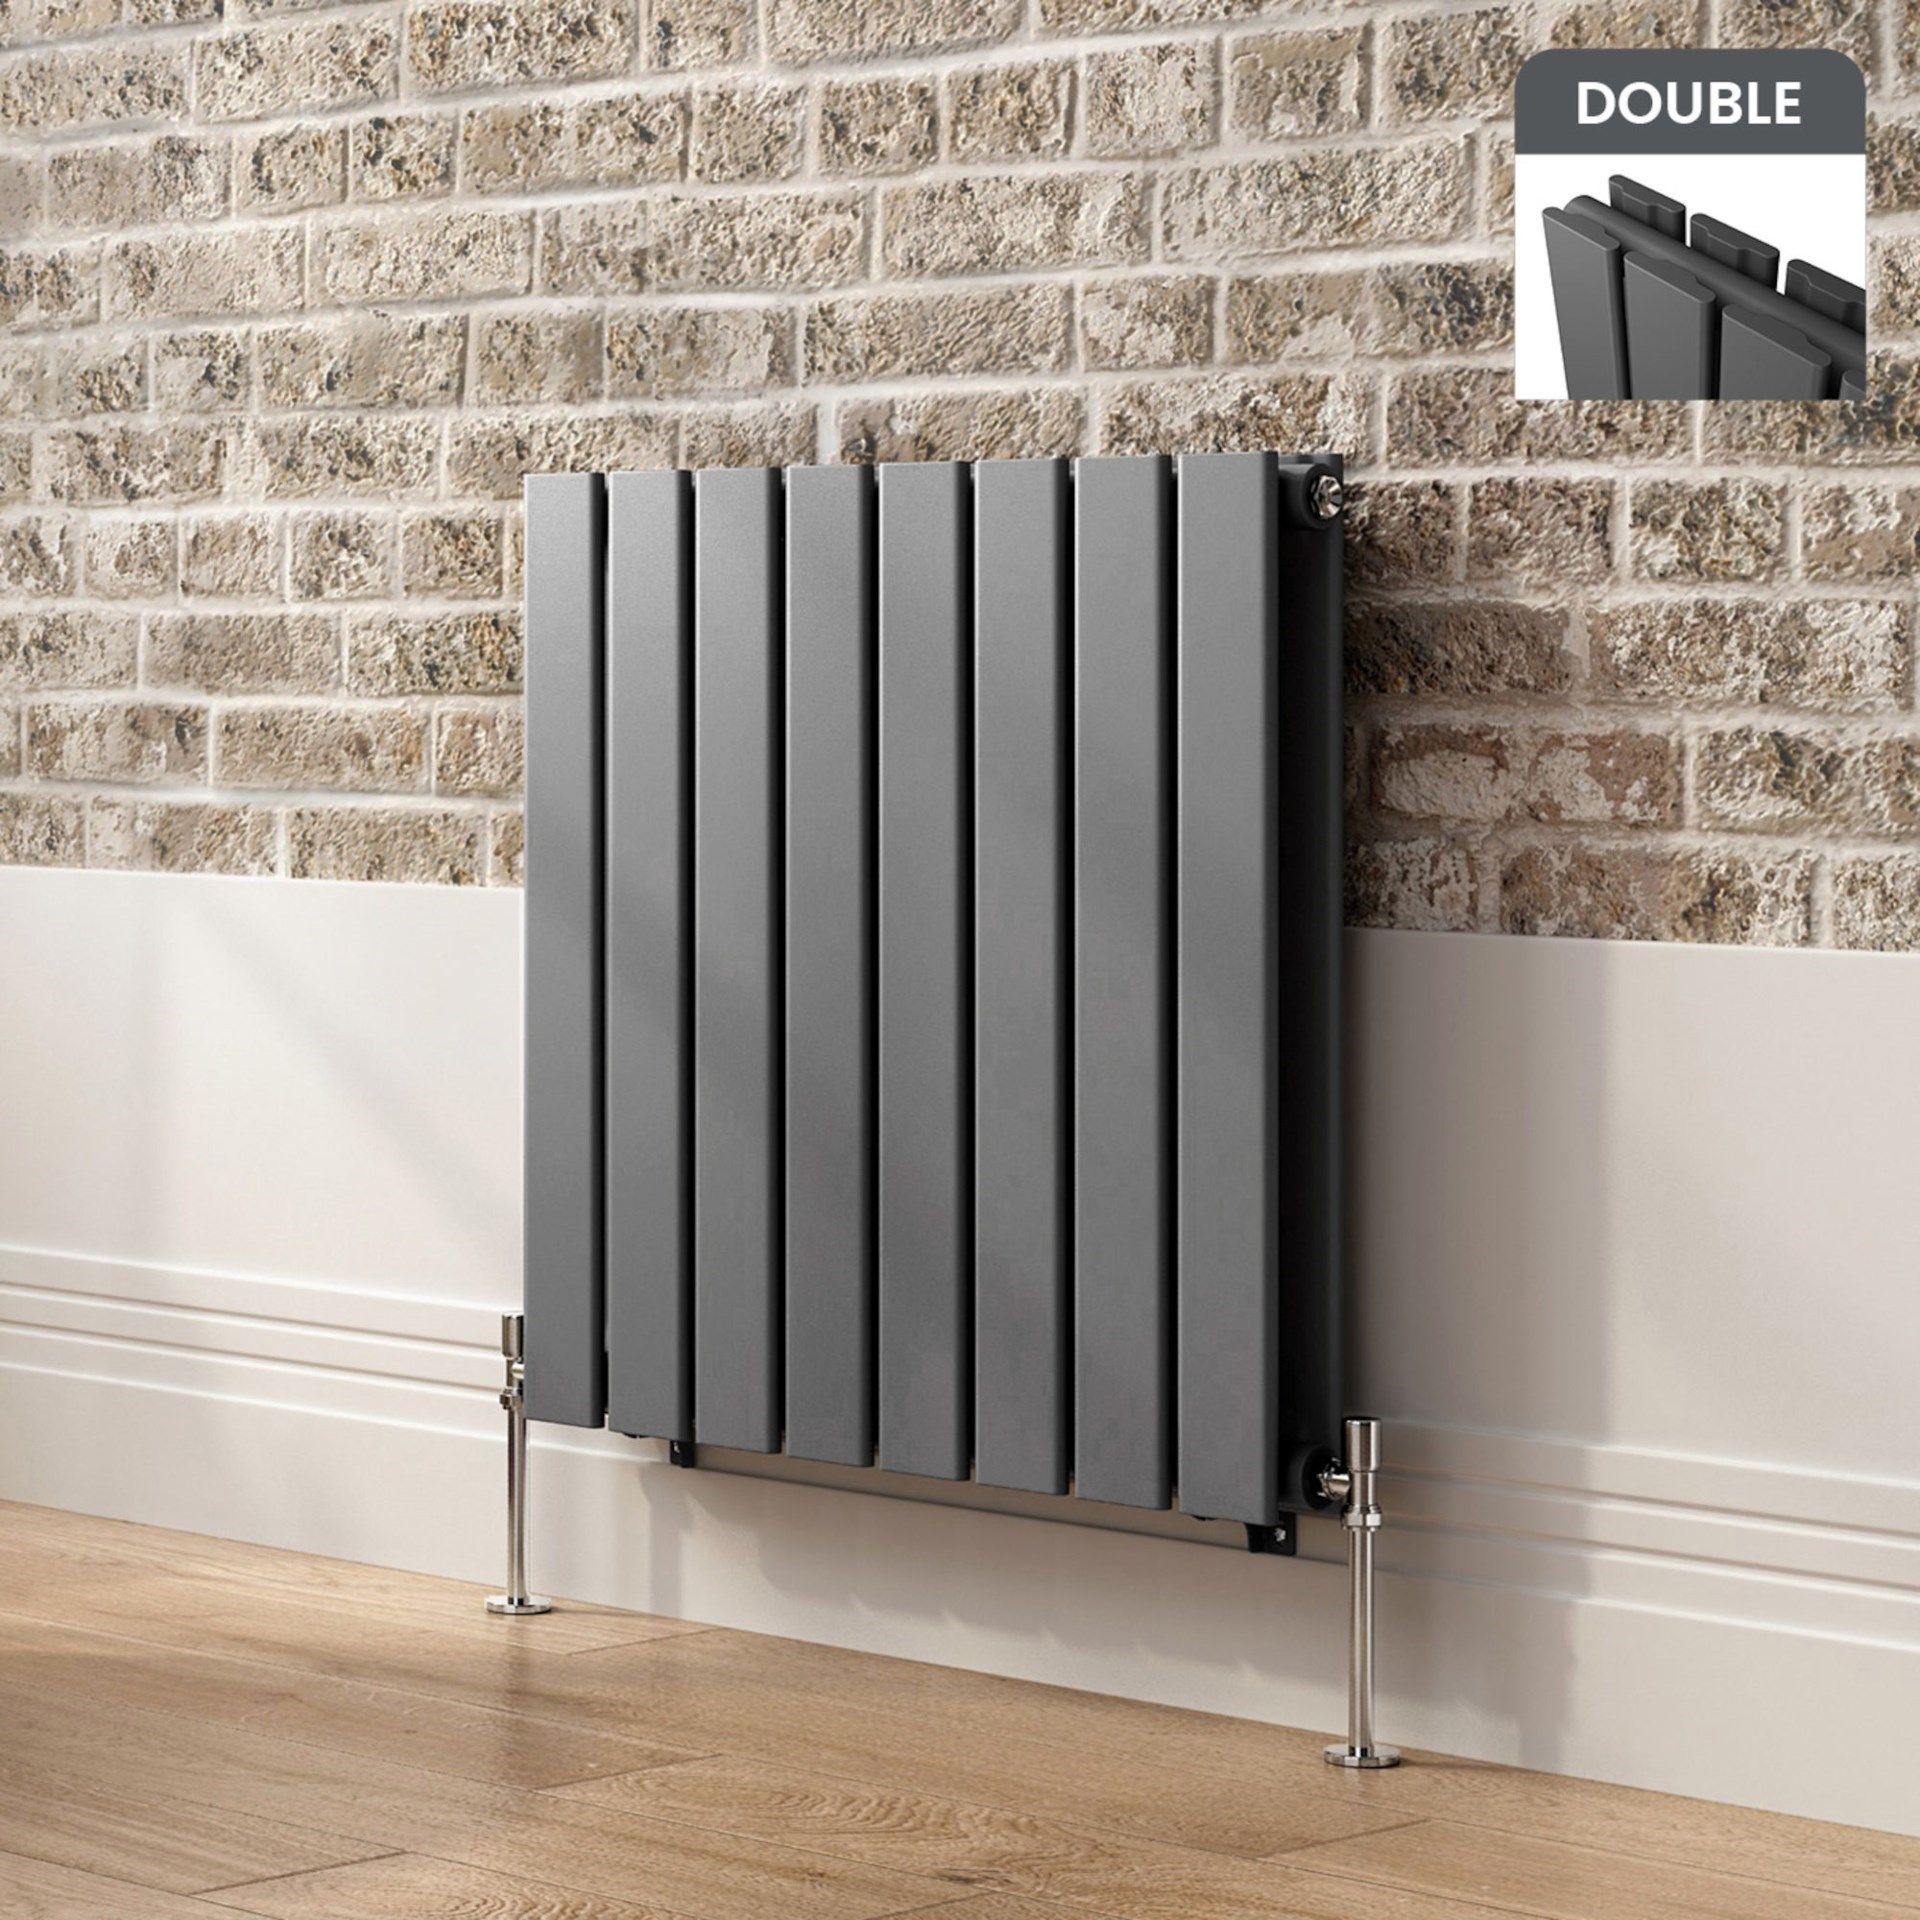 600x600mm Anthracite Double Flat Panel Horizontal Radiator. RRP £349.99.Made with high grade ... - Image 2 of 2